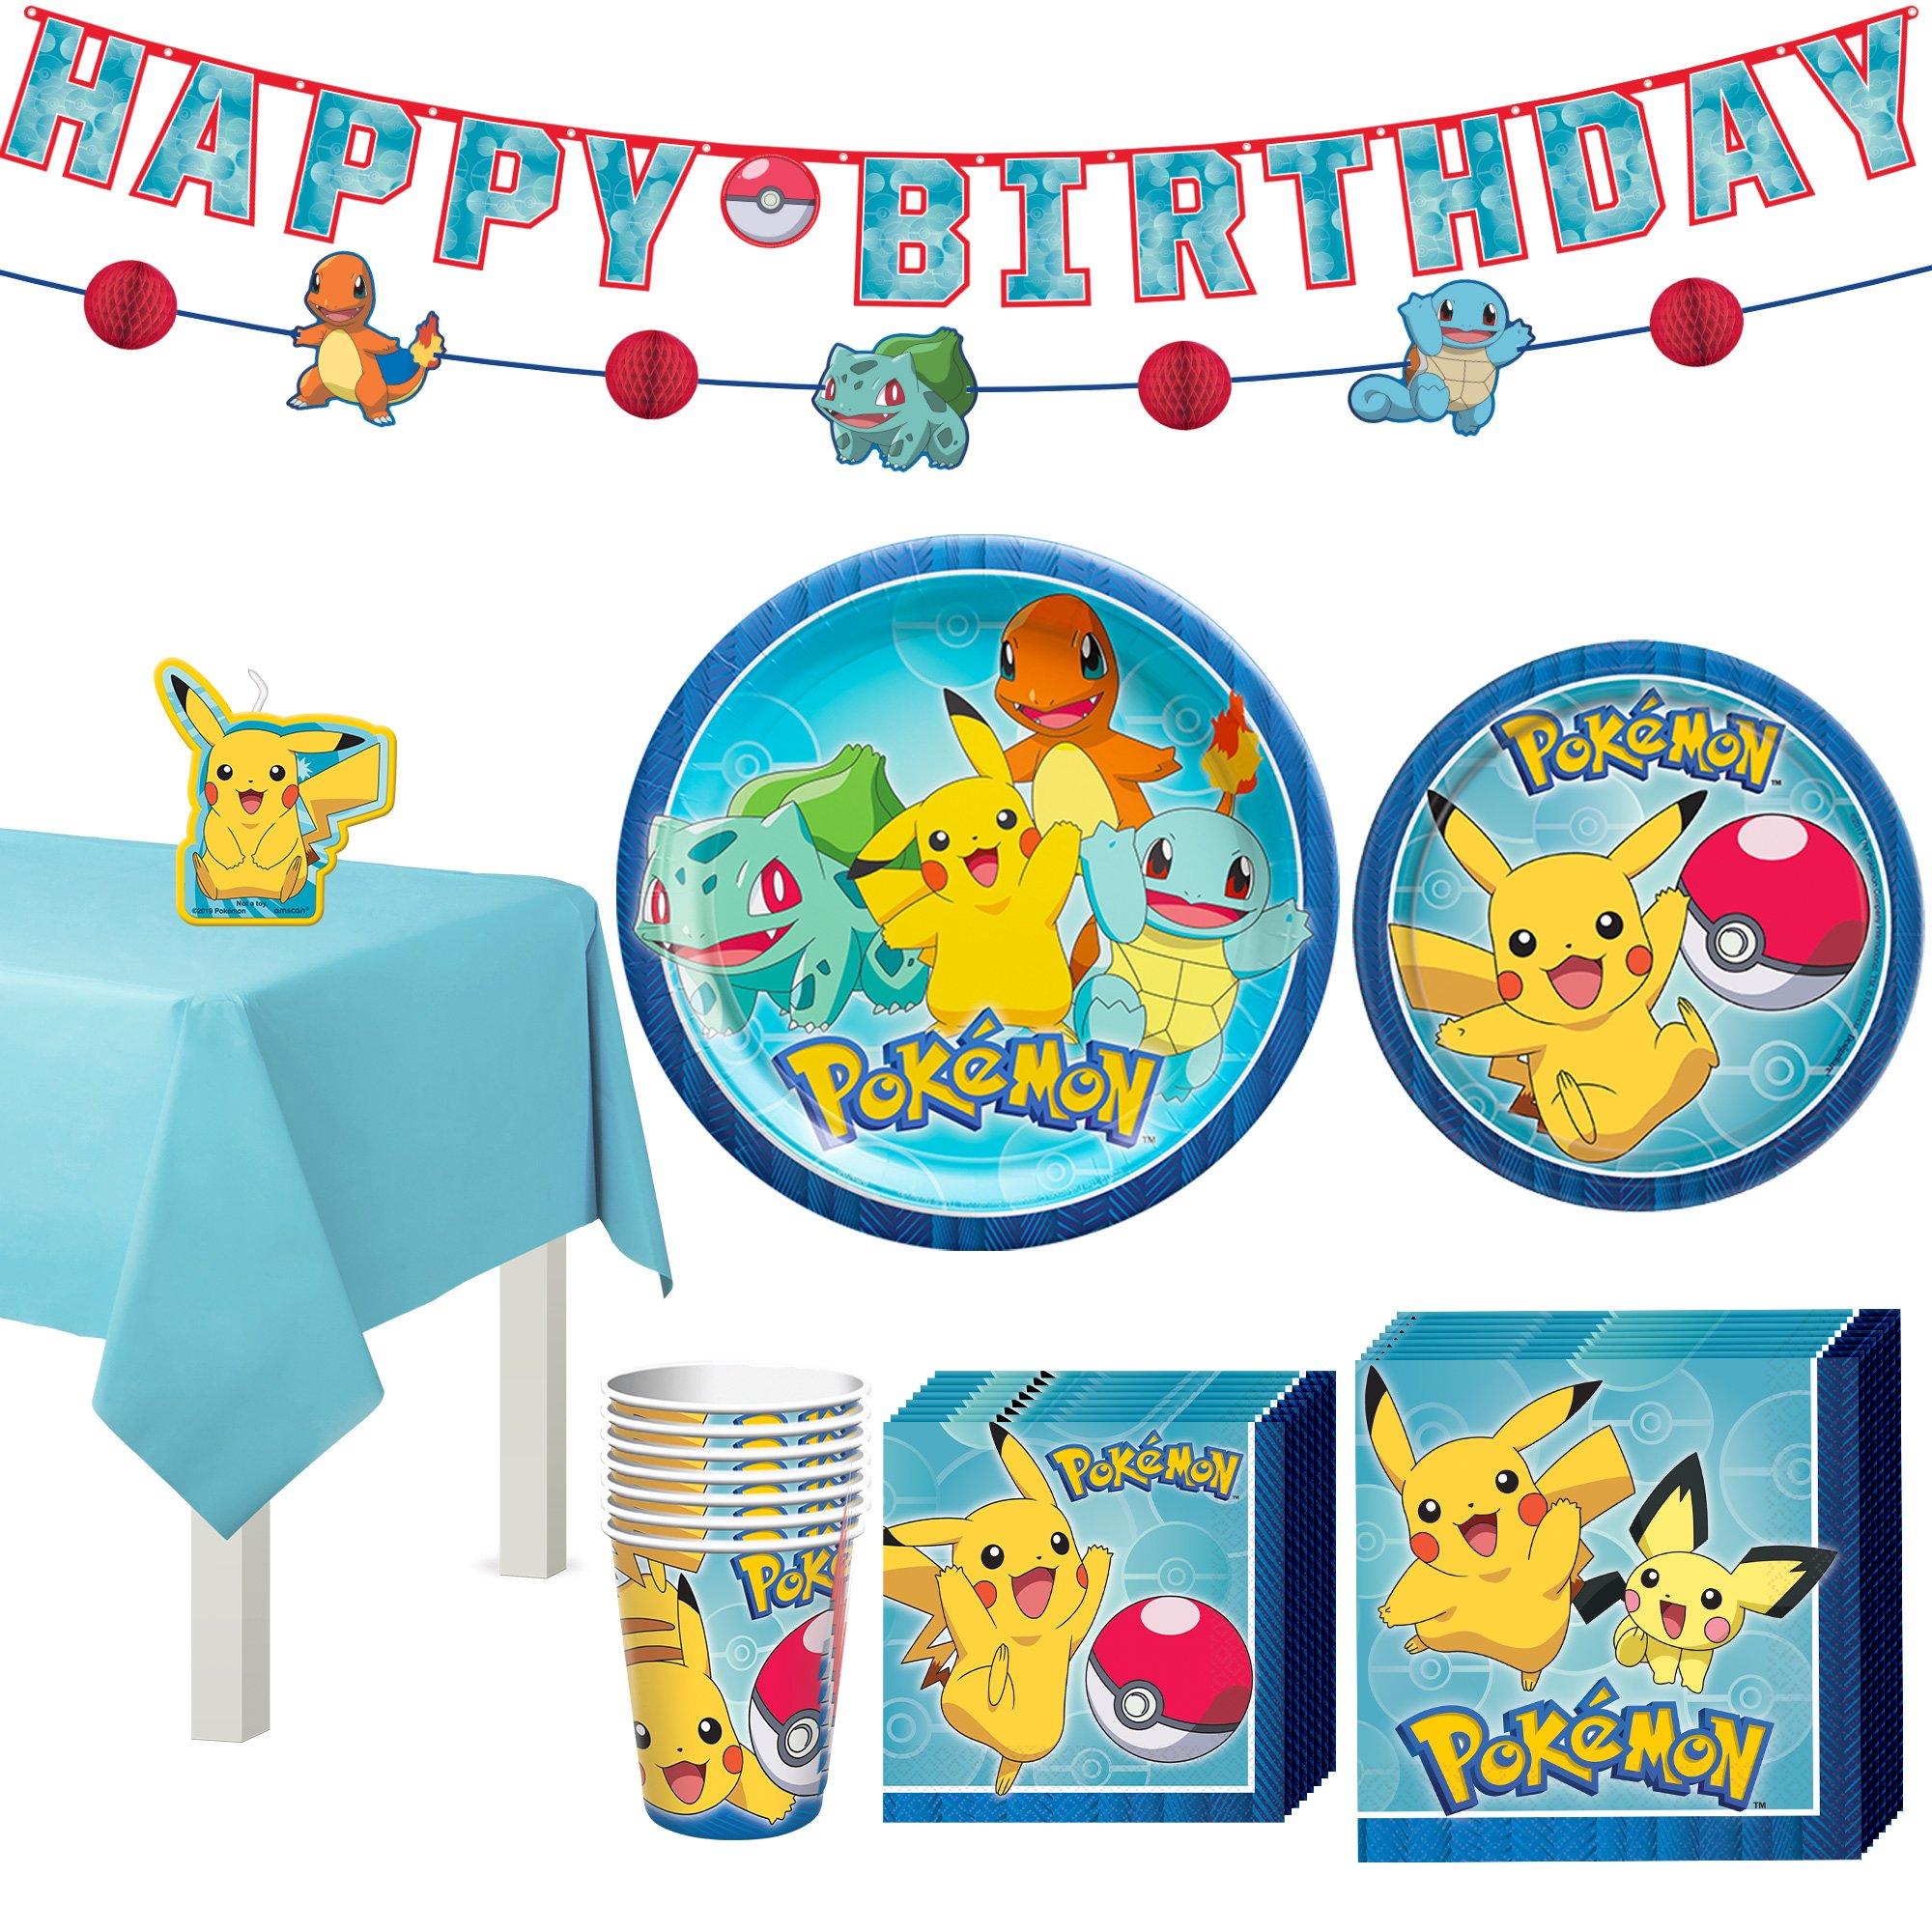 Classic Pokémon Birthday Party Supplies Pack for 8 Guests - Kit Includes Plates, Napkins, Cups, Table Cover & Banner Decoration